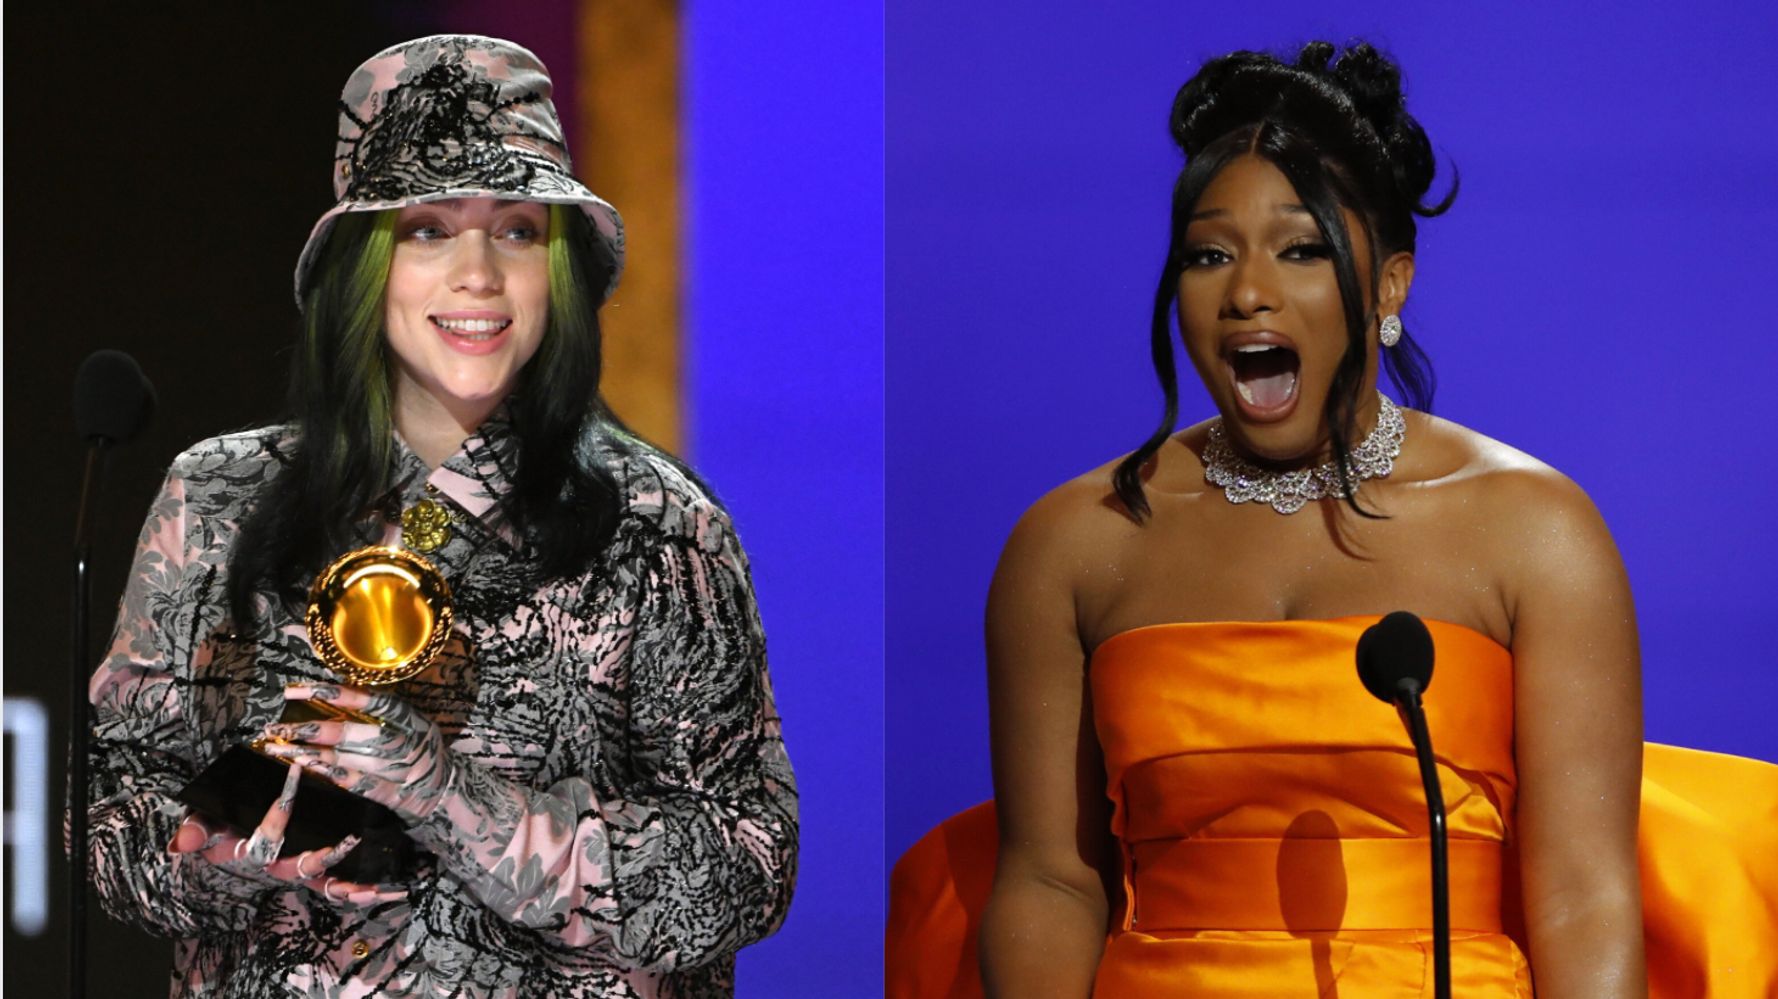 Billie Eilish says Megan Thee stallion deserves the record of the year instead of her